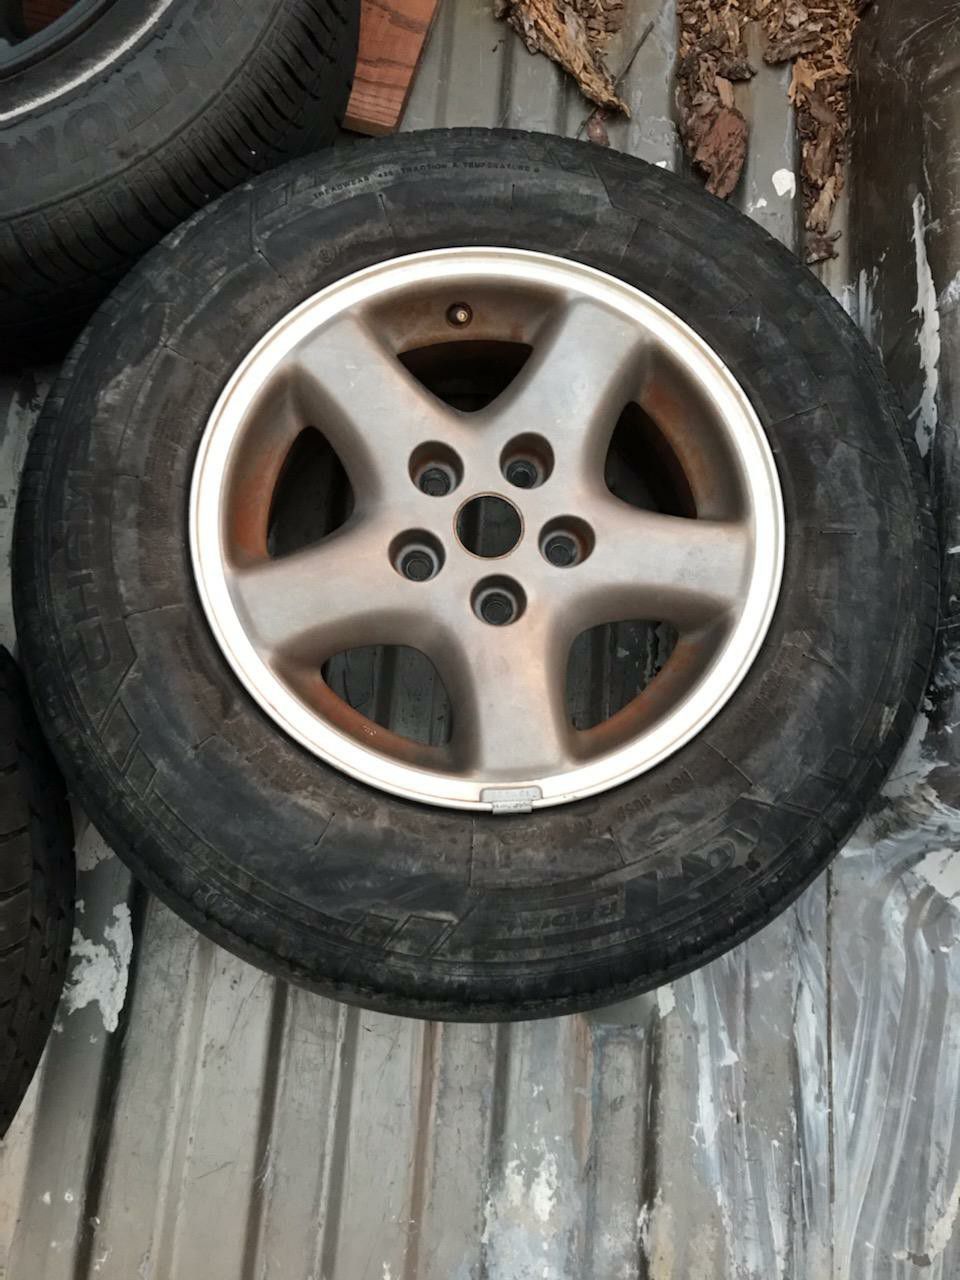 Tires go on a Jeep Cherokee comes with 5 rims with tires somewhere good some bad, and a good for f 150 red